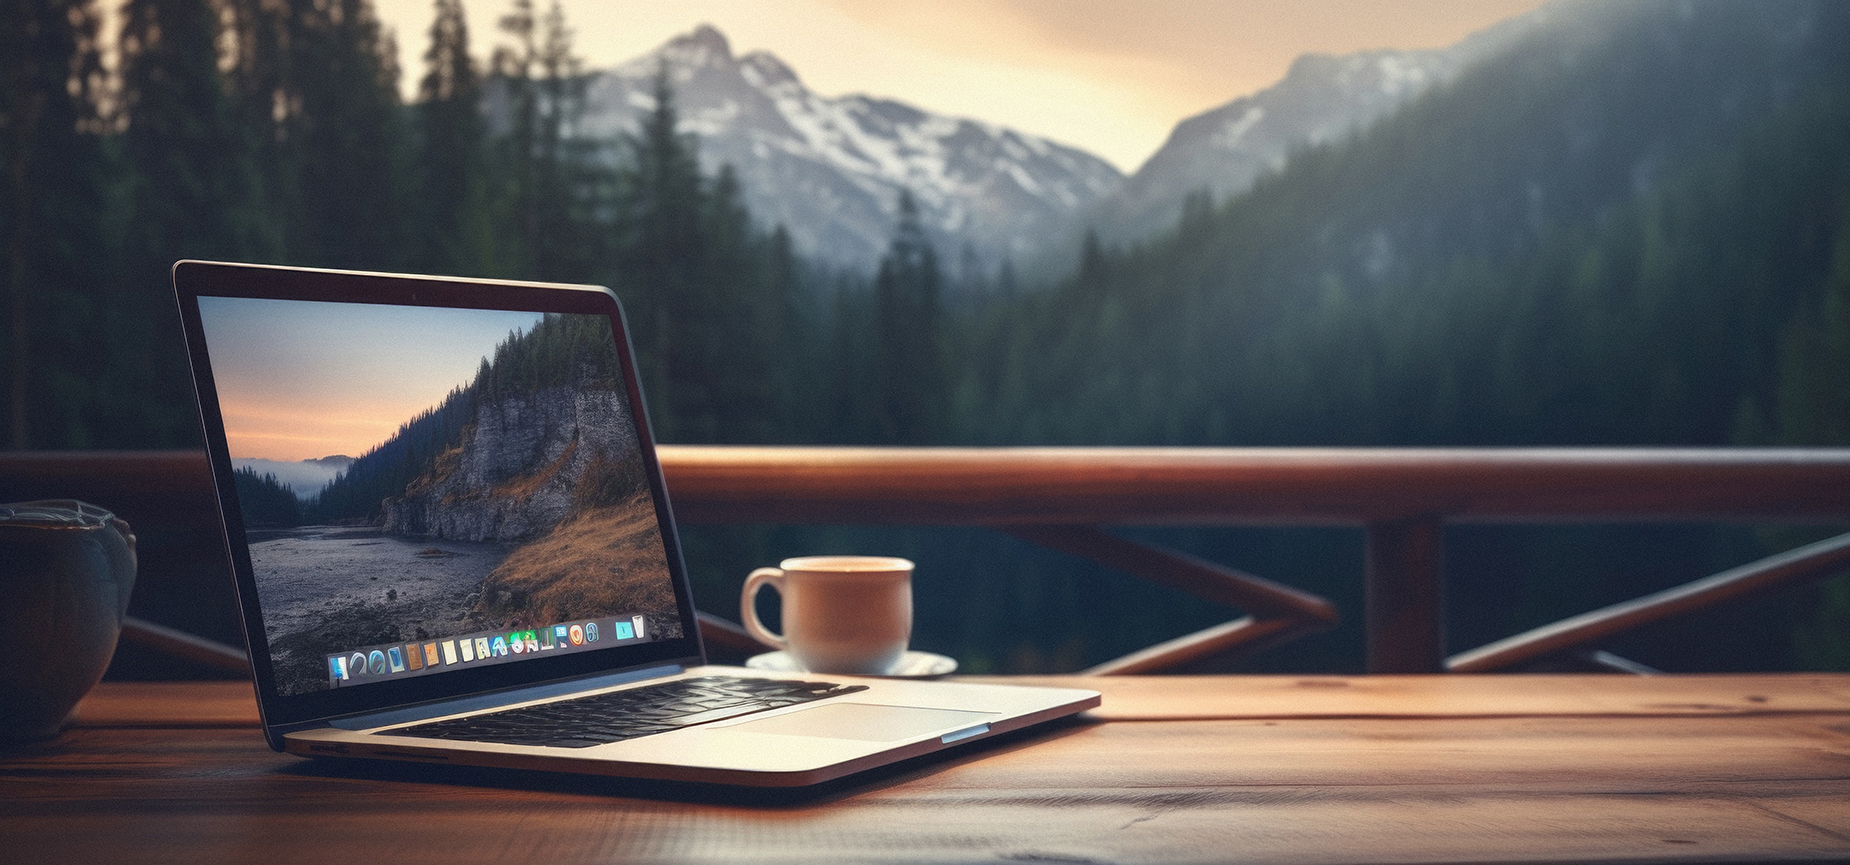 Laptop and coffee cup on wooden table against picturesque mountain landscape